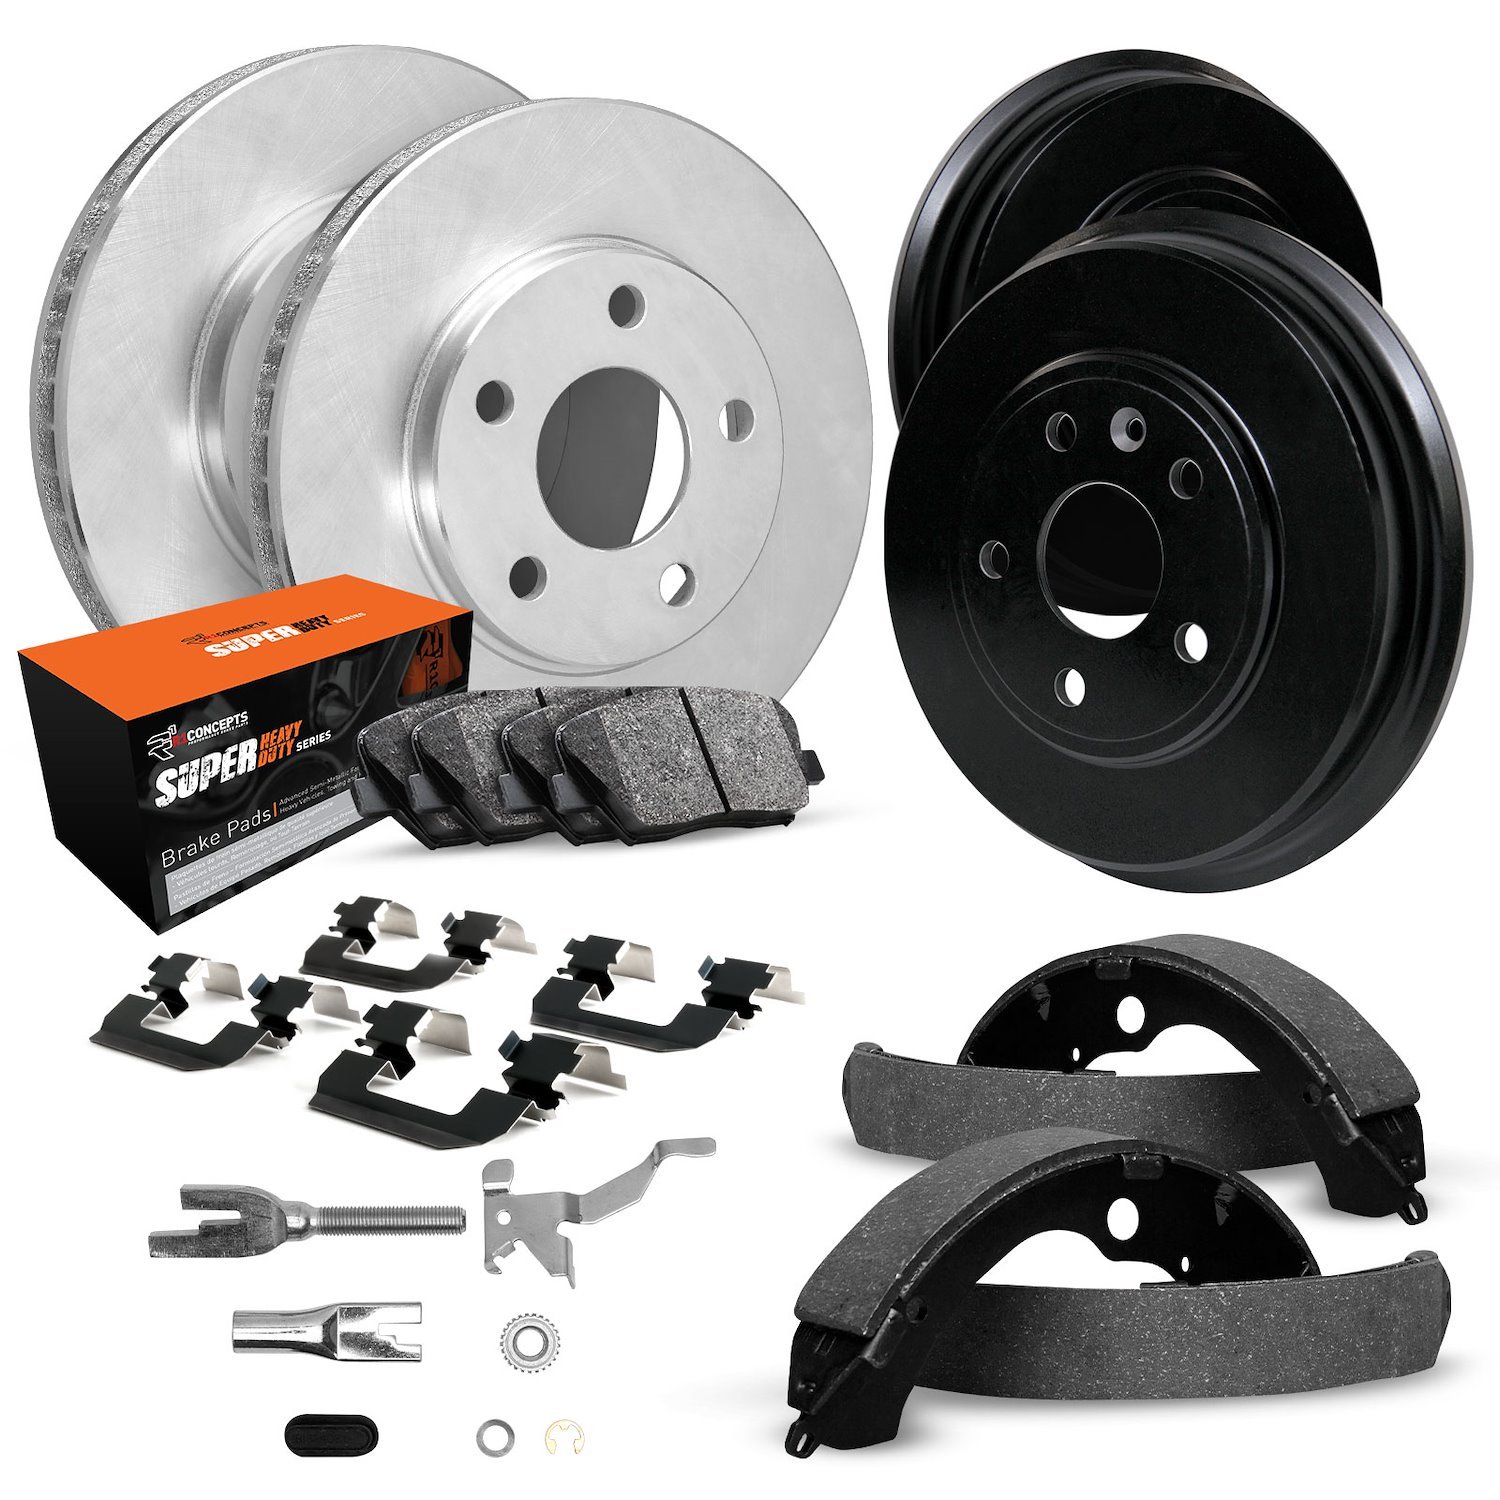 E-Line Blank Brake Rotor & Drum Set w/Super-Duty Pads, Shoes, Hardware, & Adjusters, 1990-2002 GM, Position: Front & Rear